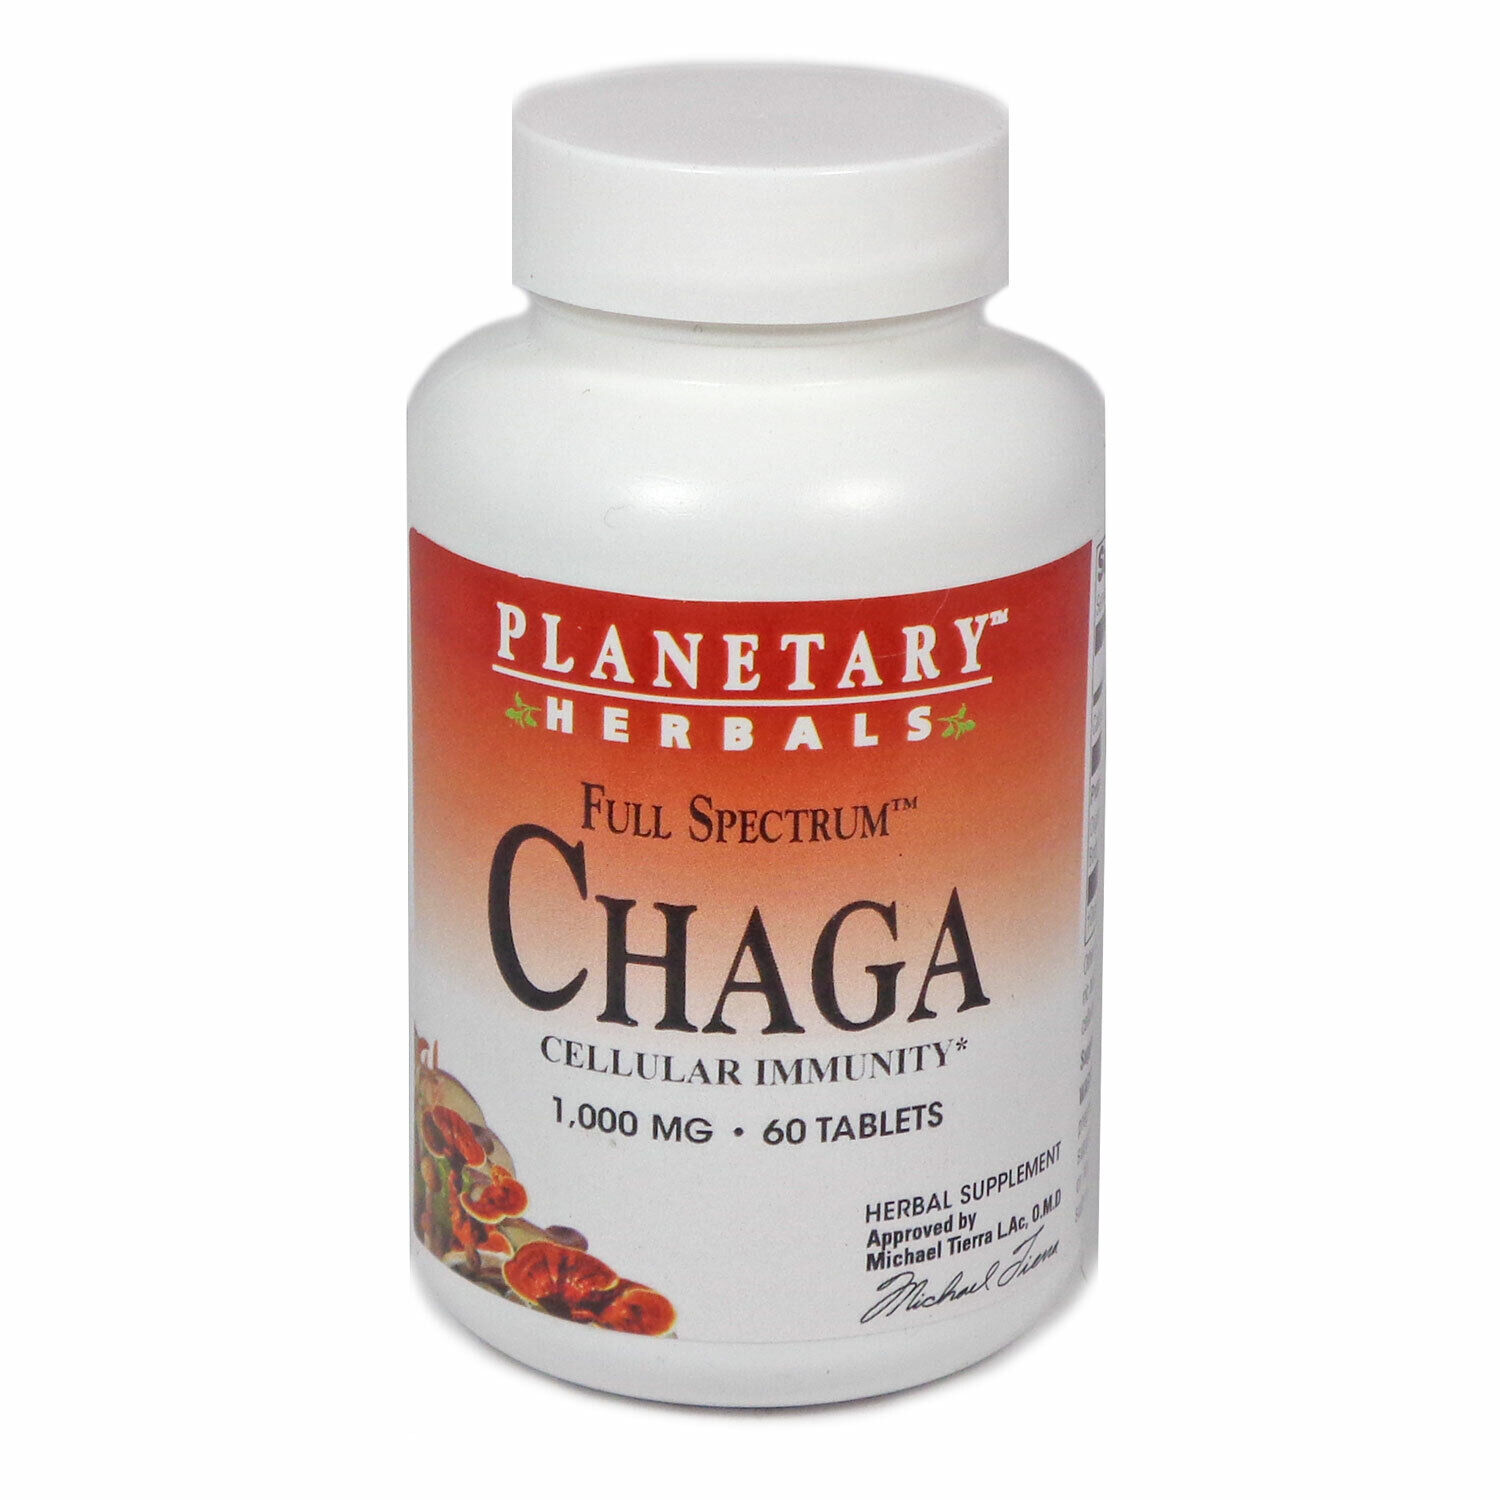 Chaga Full Spectrum 1000mg By Planetary Herbals - 60 Tablet